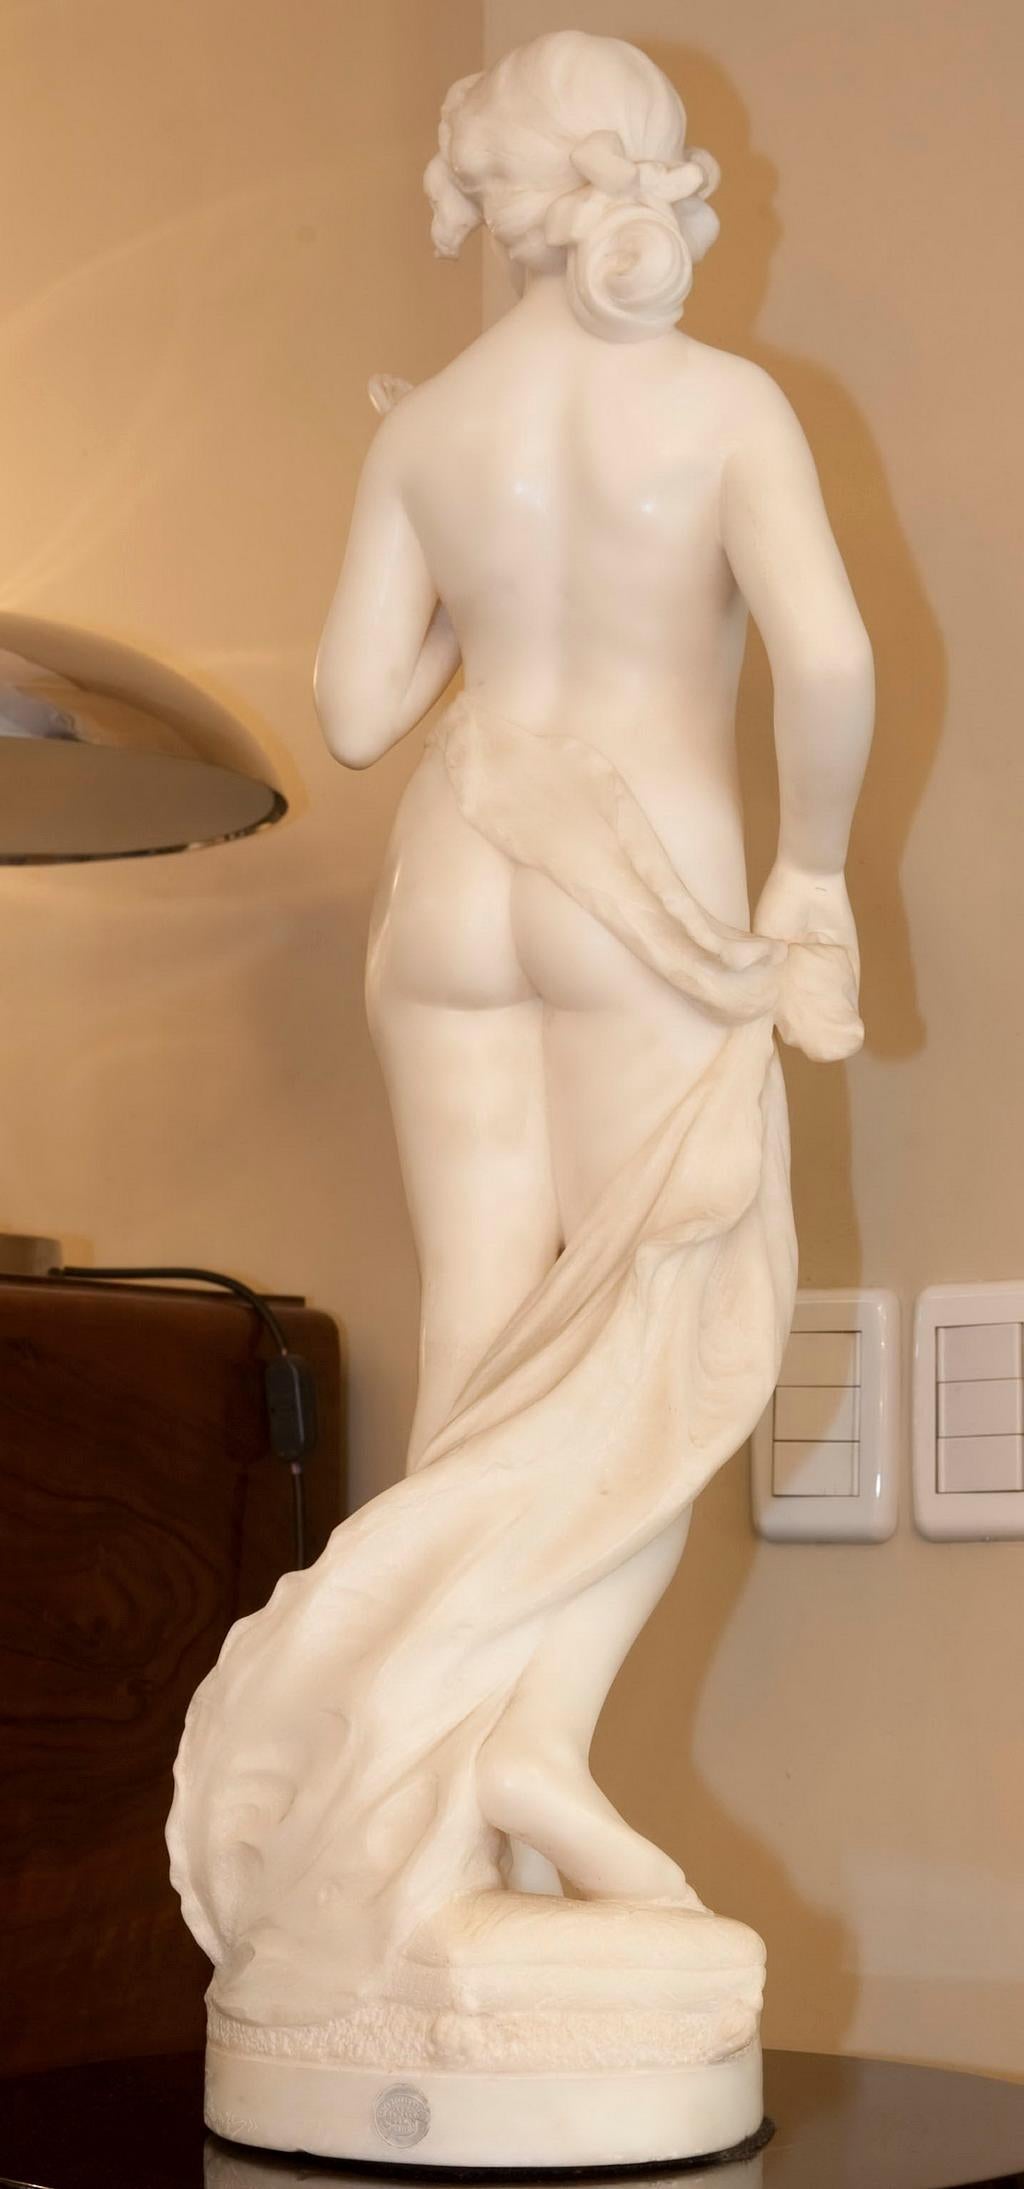 Woman with mirror Sculpture in Marble 
Sign: Prof. Jory 
Galleria Lapini Firenze
Sold by: Casa Bellas artes Av. de Mayo 625
We have specialized in the sale of Art Deco and Art Nouveau and Vintage styles since 1982.If you have any questions we are at